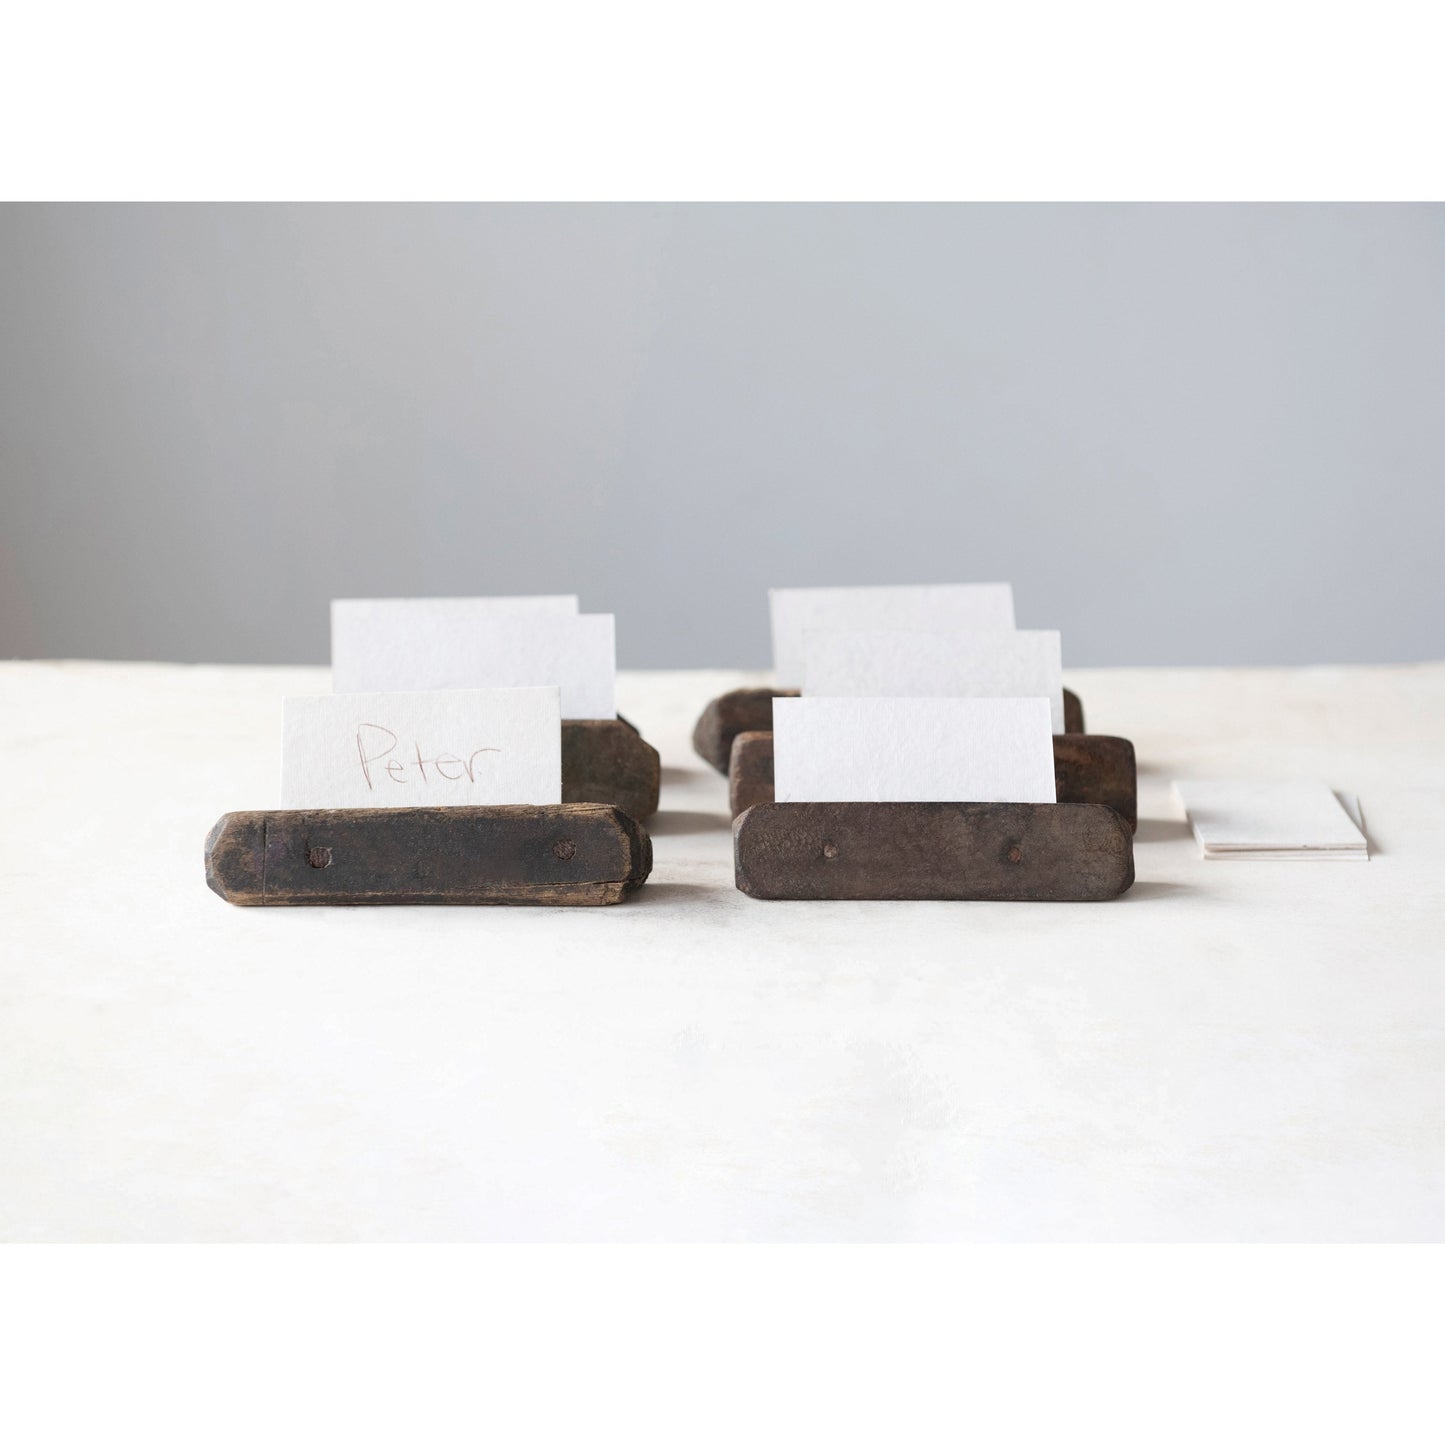 Individual Reclaimed Photo/Card Holder